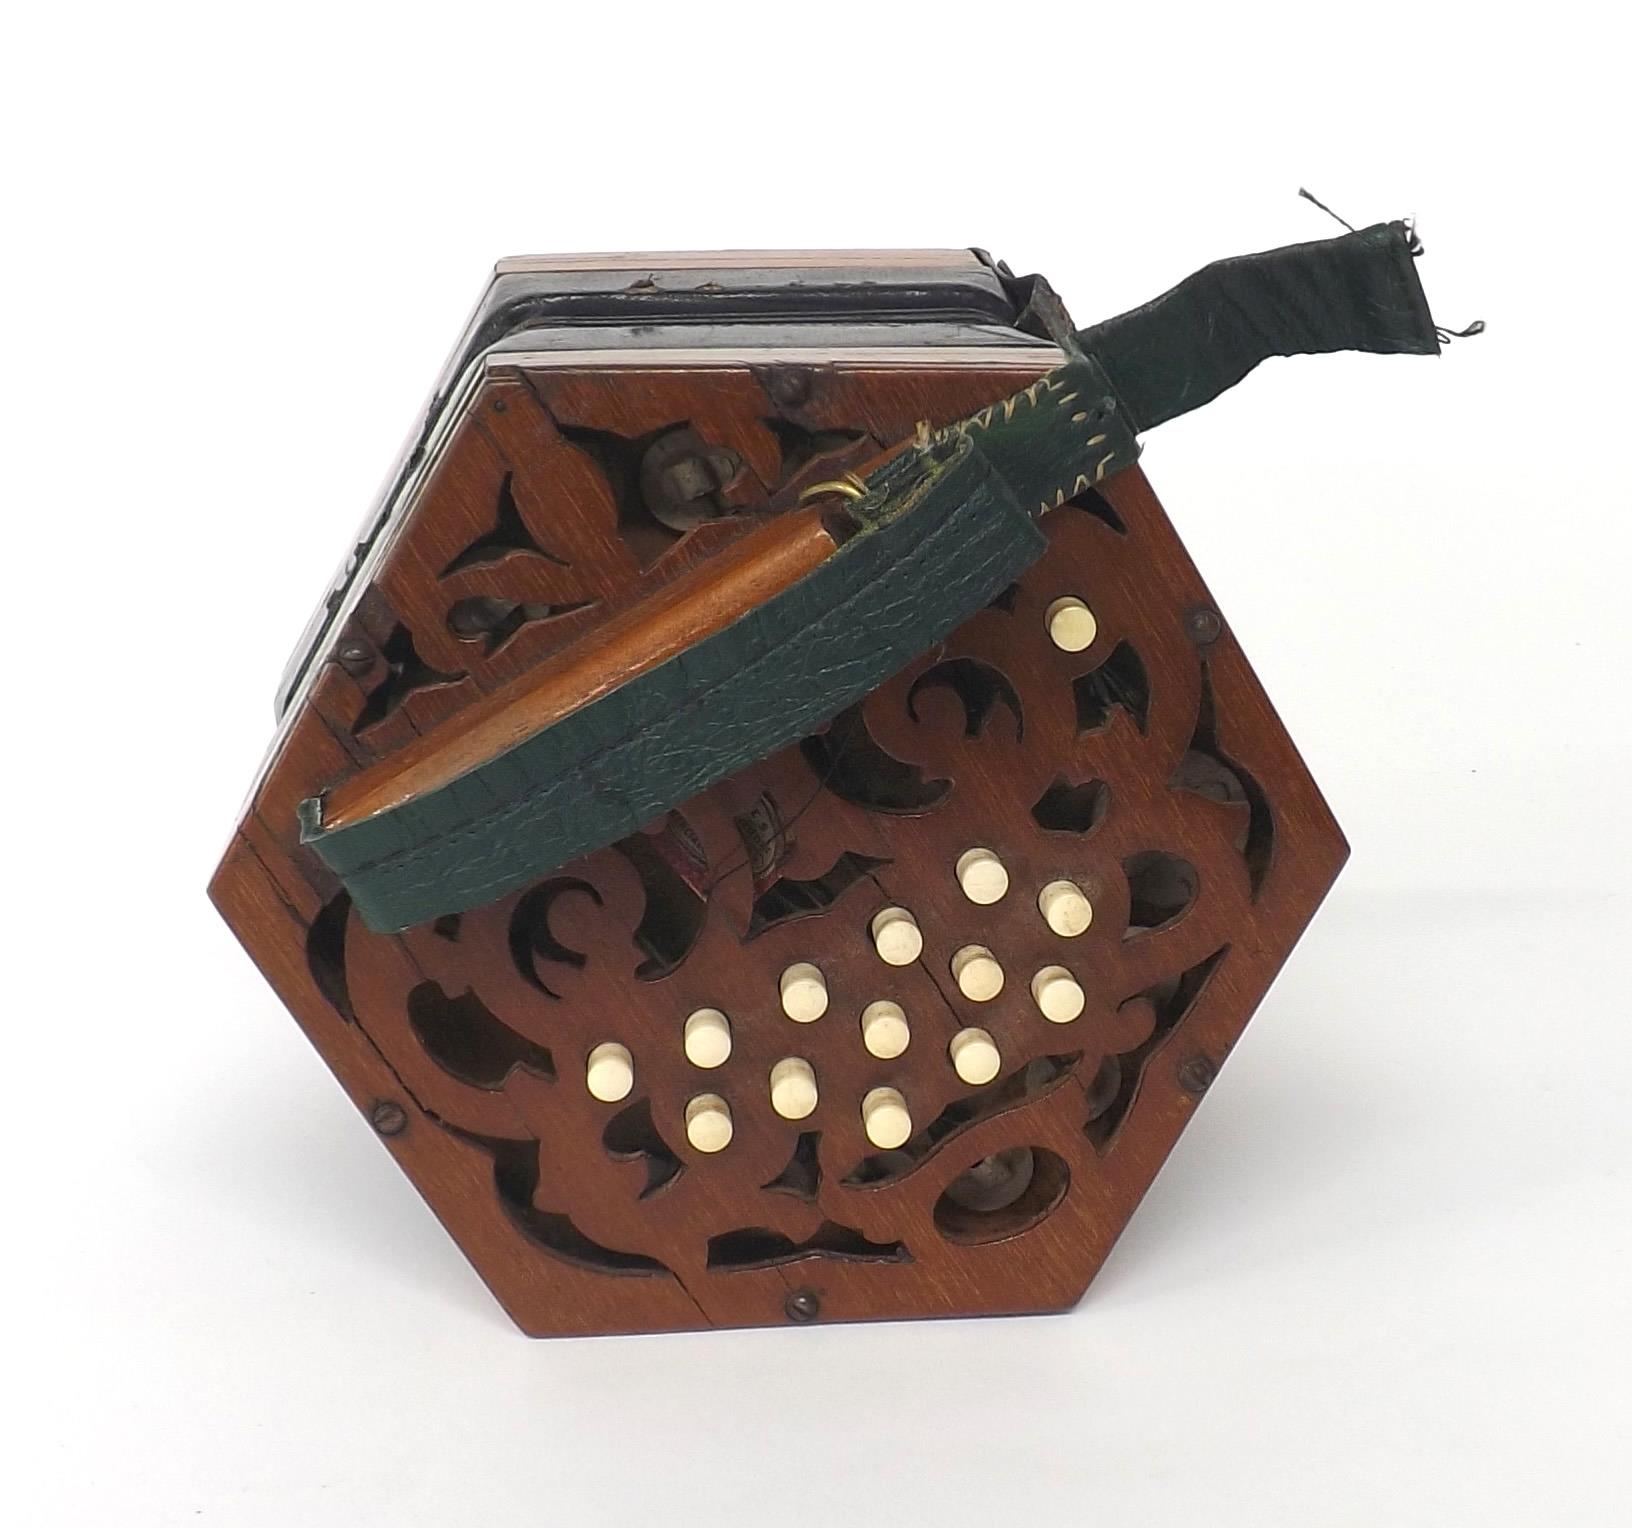 C. Jones concertina in need of restoration, with twenty-seven bone buttons on pierced mahogany ends, - Image 2 of 5